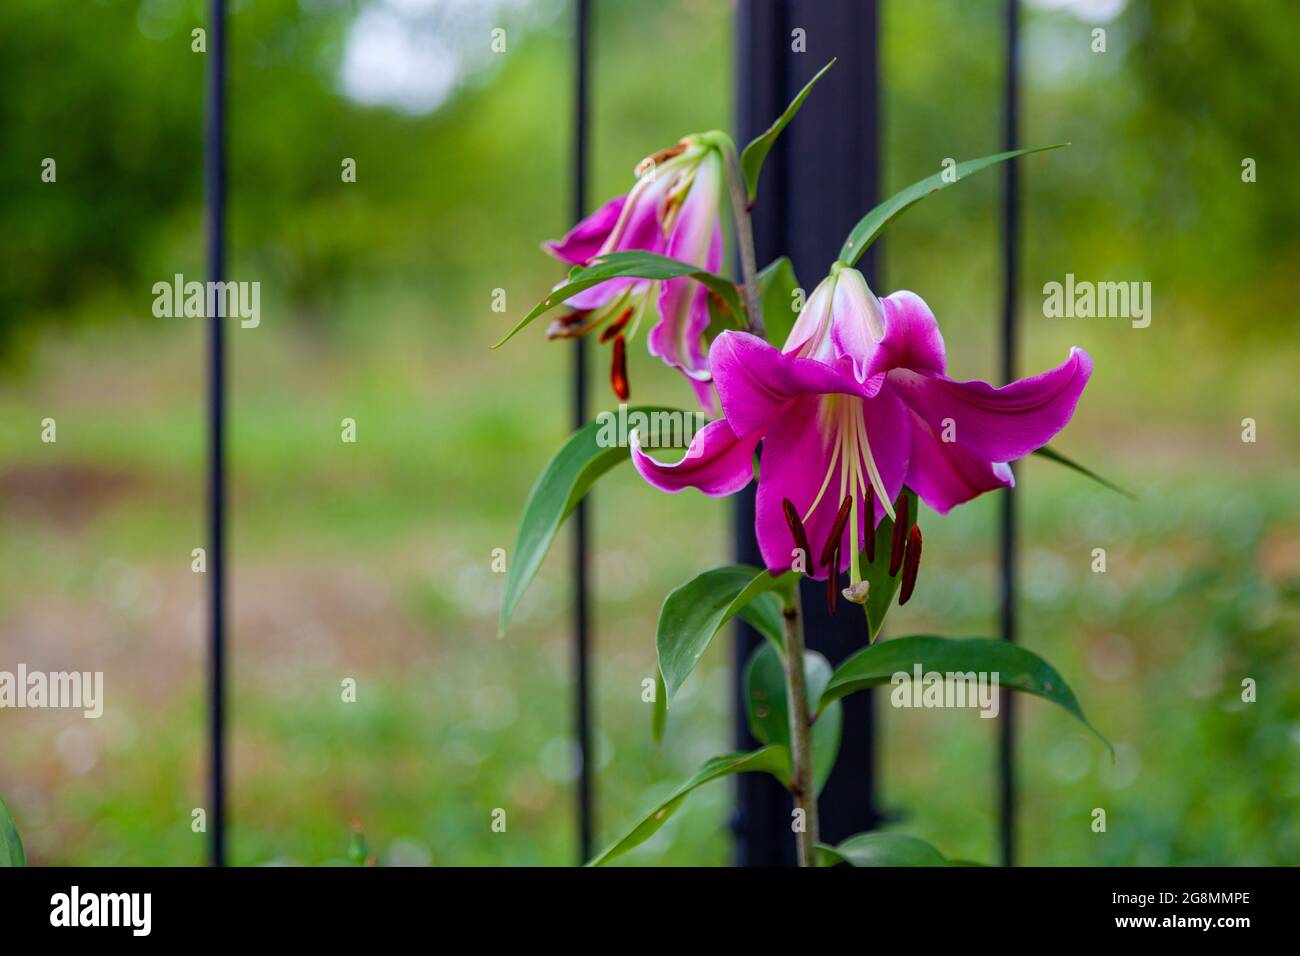 Large lilac lilies grow in the garden against the background of a metal fence. Stock Photo